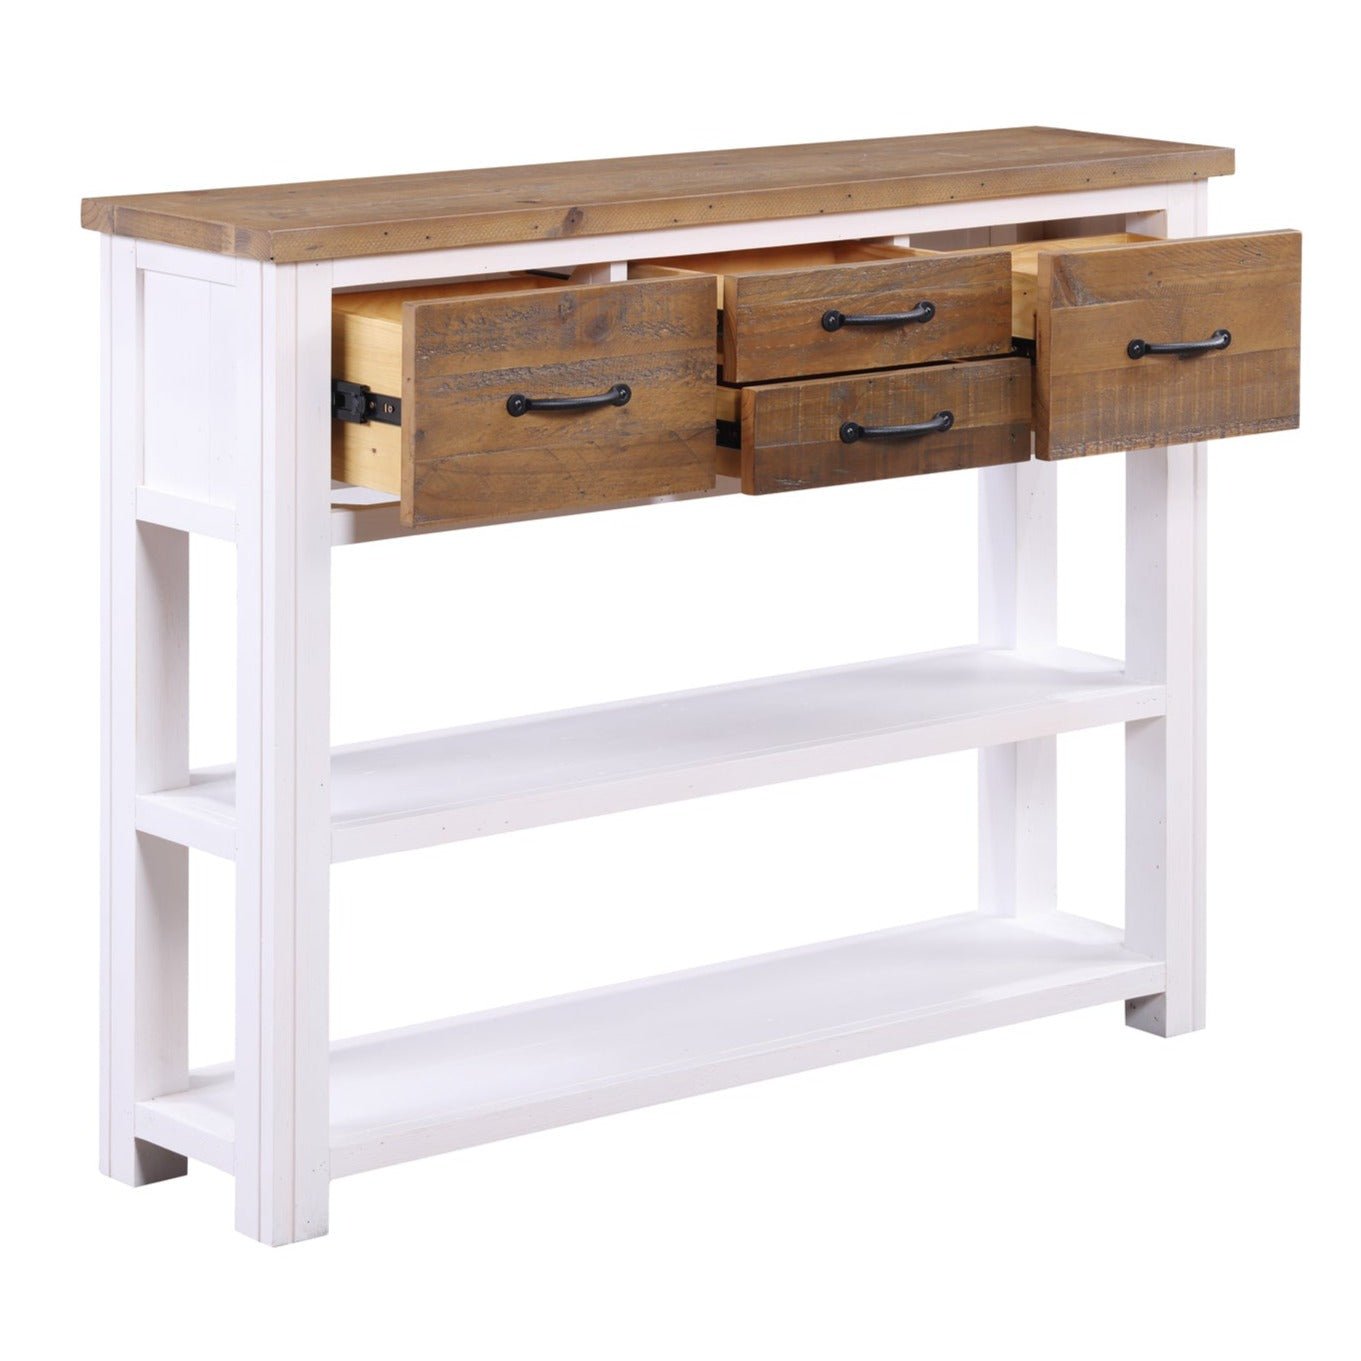 Splash of White Console Table with Storage - Duck Barn Interiors